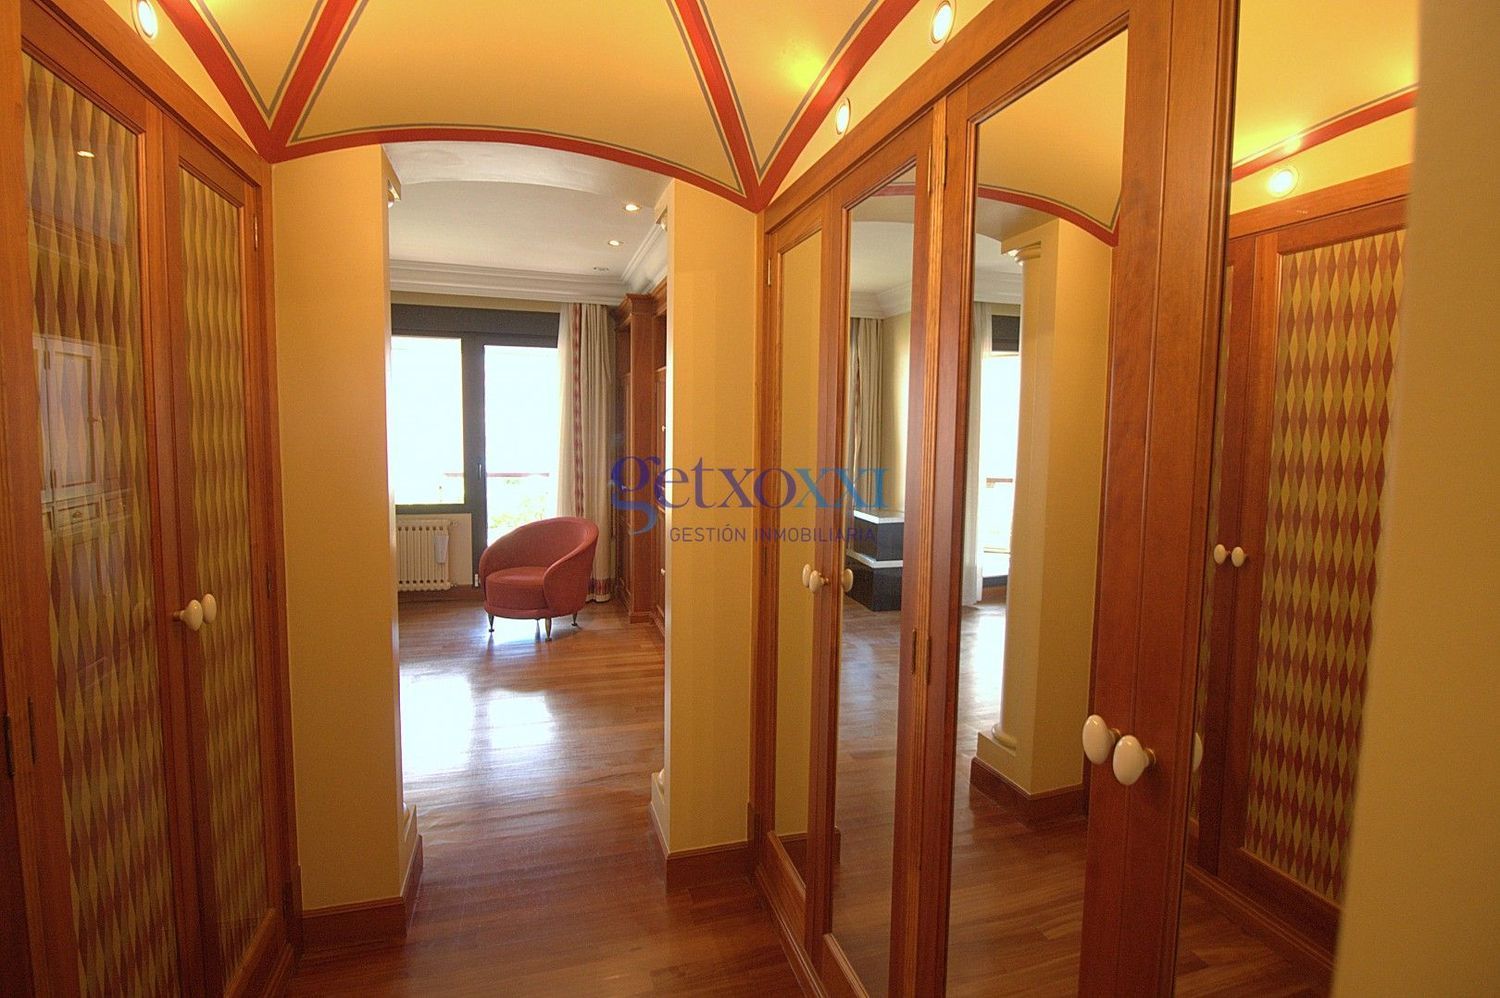 Apartment for sale on the seafront on Zugazarte Avenue, in Getxo